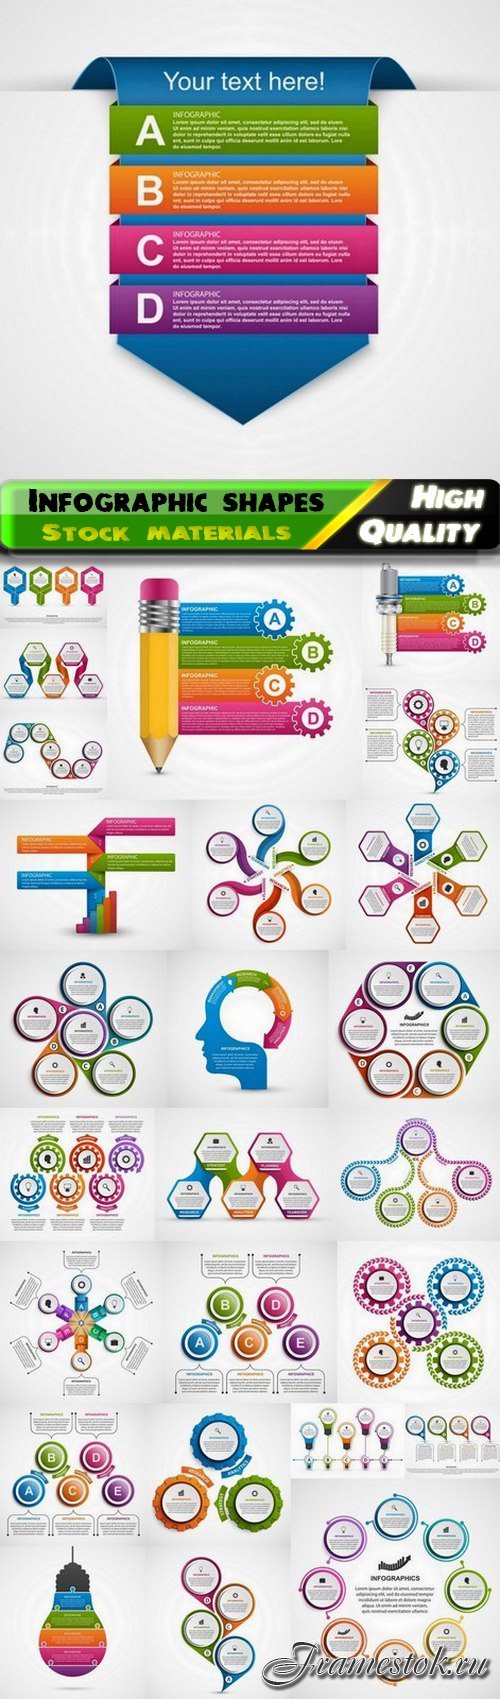 Business infographic informacion shape for text and banner 25 Eps